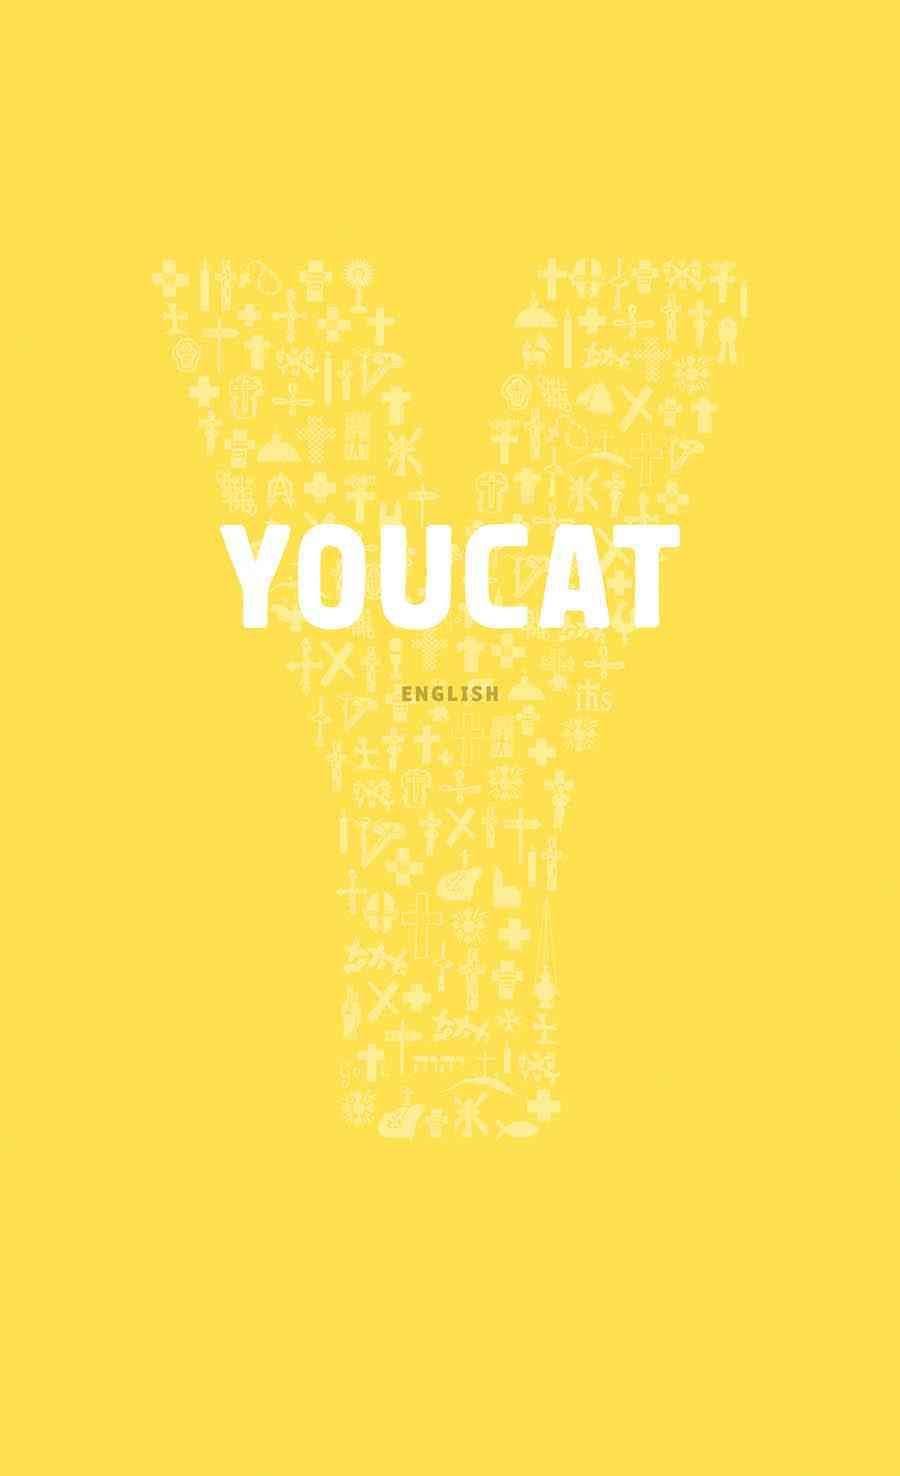 Youcat English: Youth Catechism of the Catholic Church [Book]